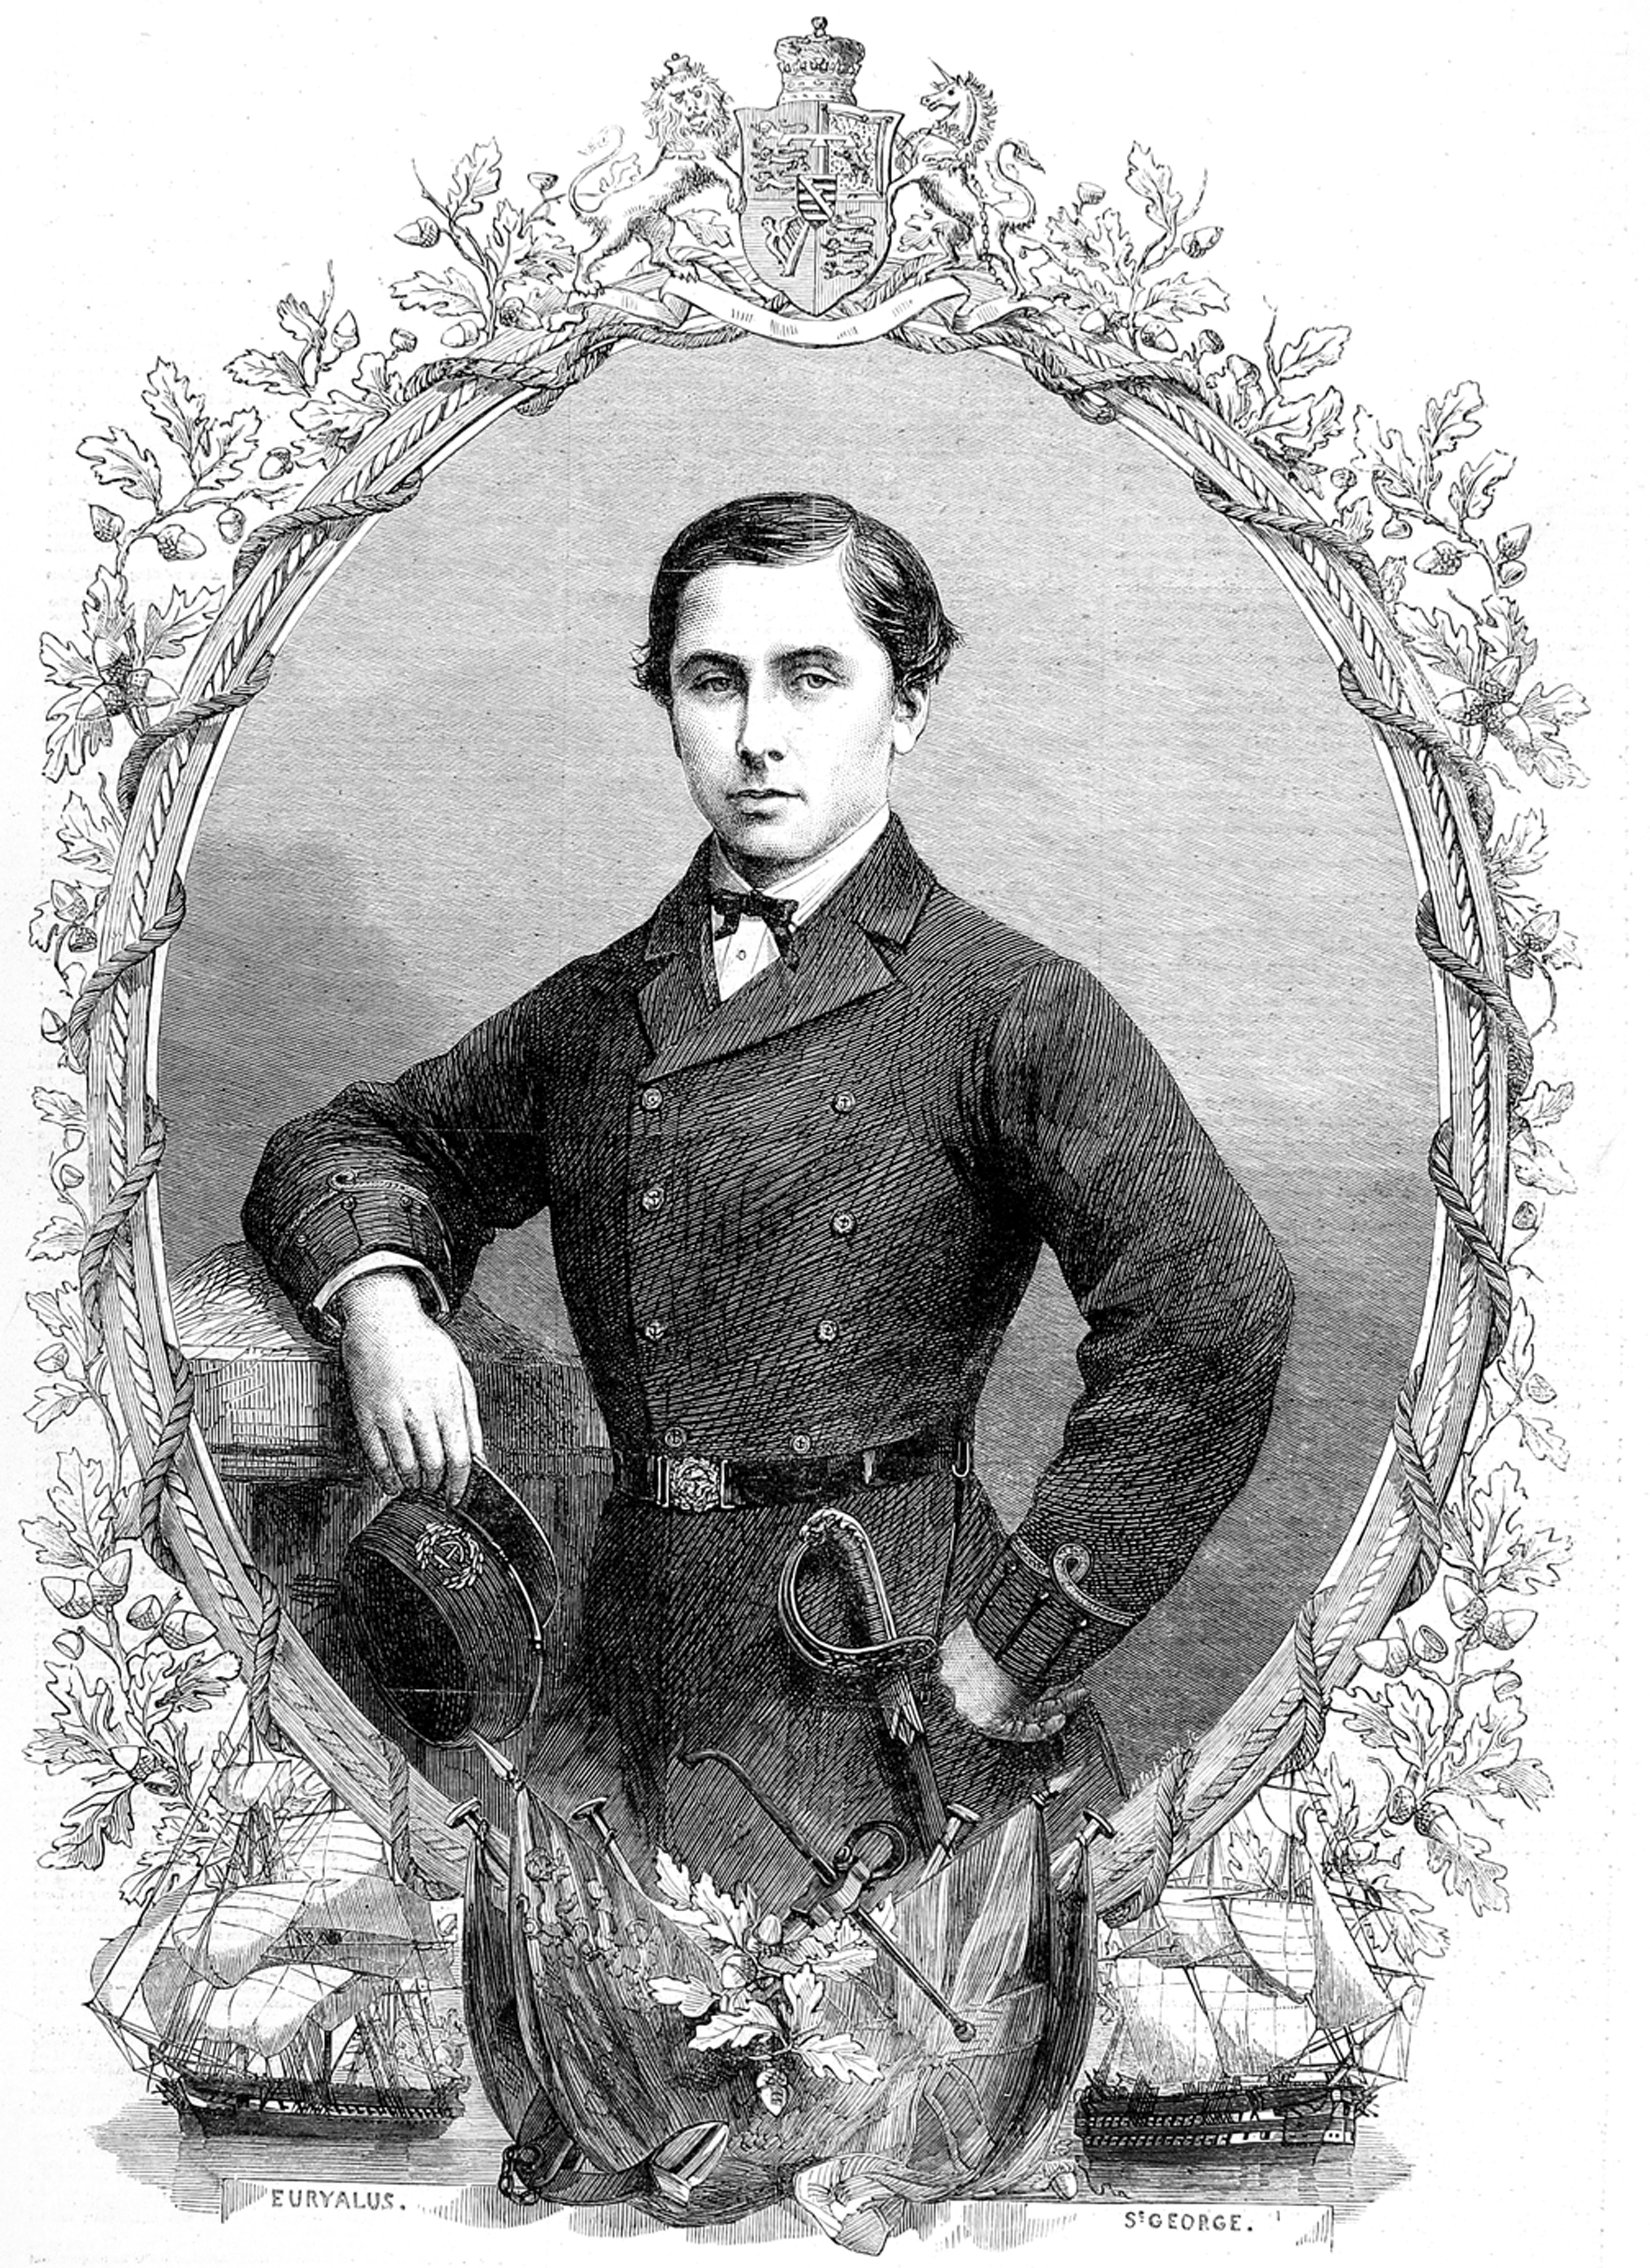 Prince Alfred ‘Affie’, later Duke of Edinburgh (1844 - 1900), second son and fourth child of Queen Victoria and Prince Albert. 